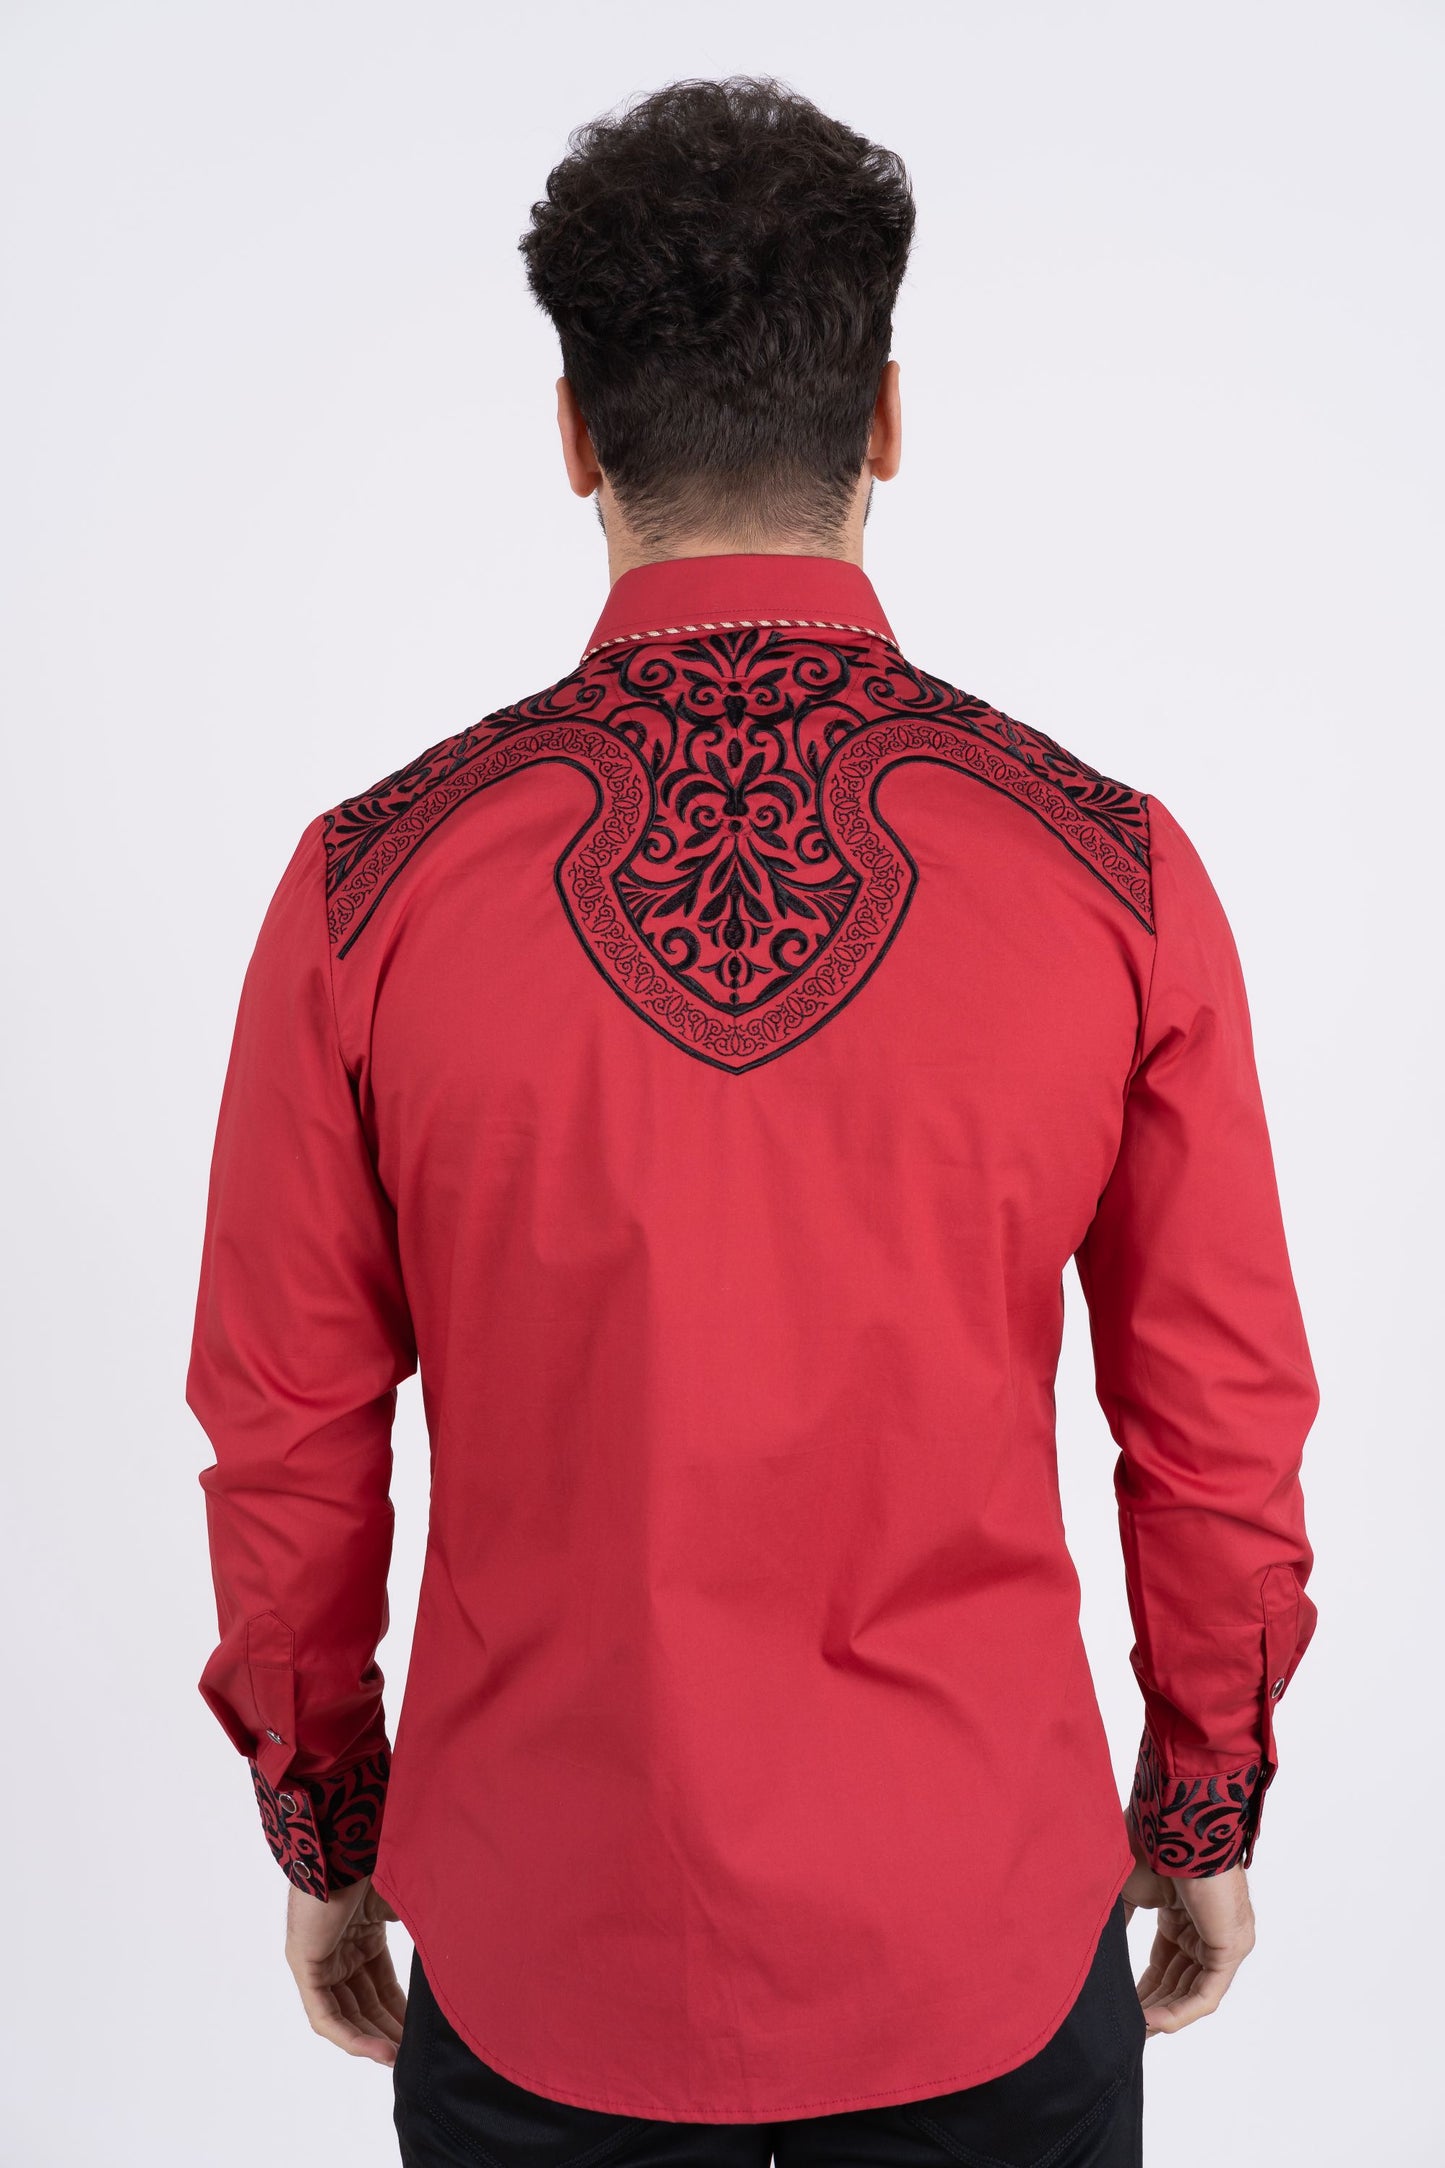 Men's Cotton Red Embroidery Western Shirt